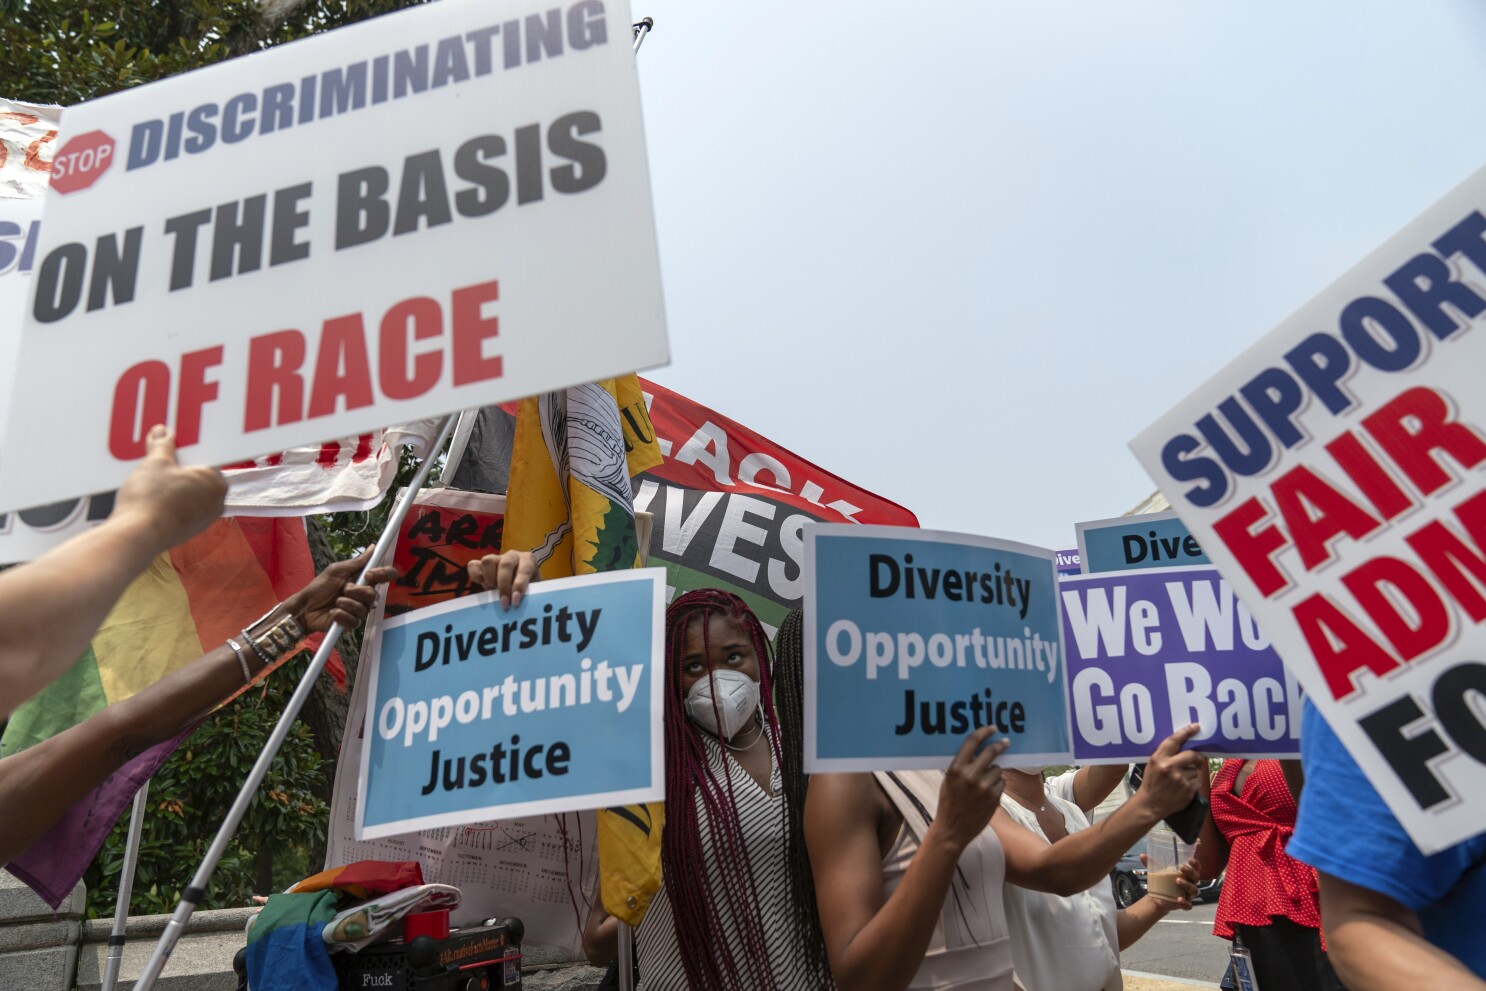 Affirmative action: US Supreme Court overturns race-based college admissions